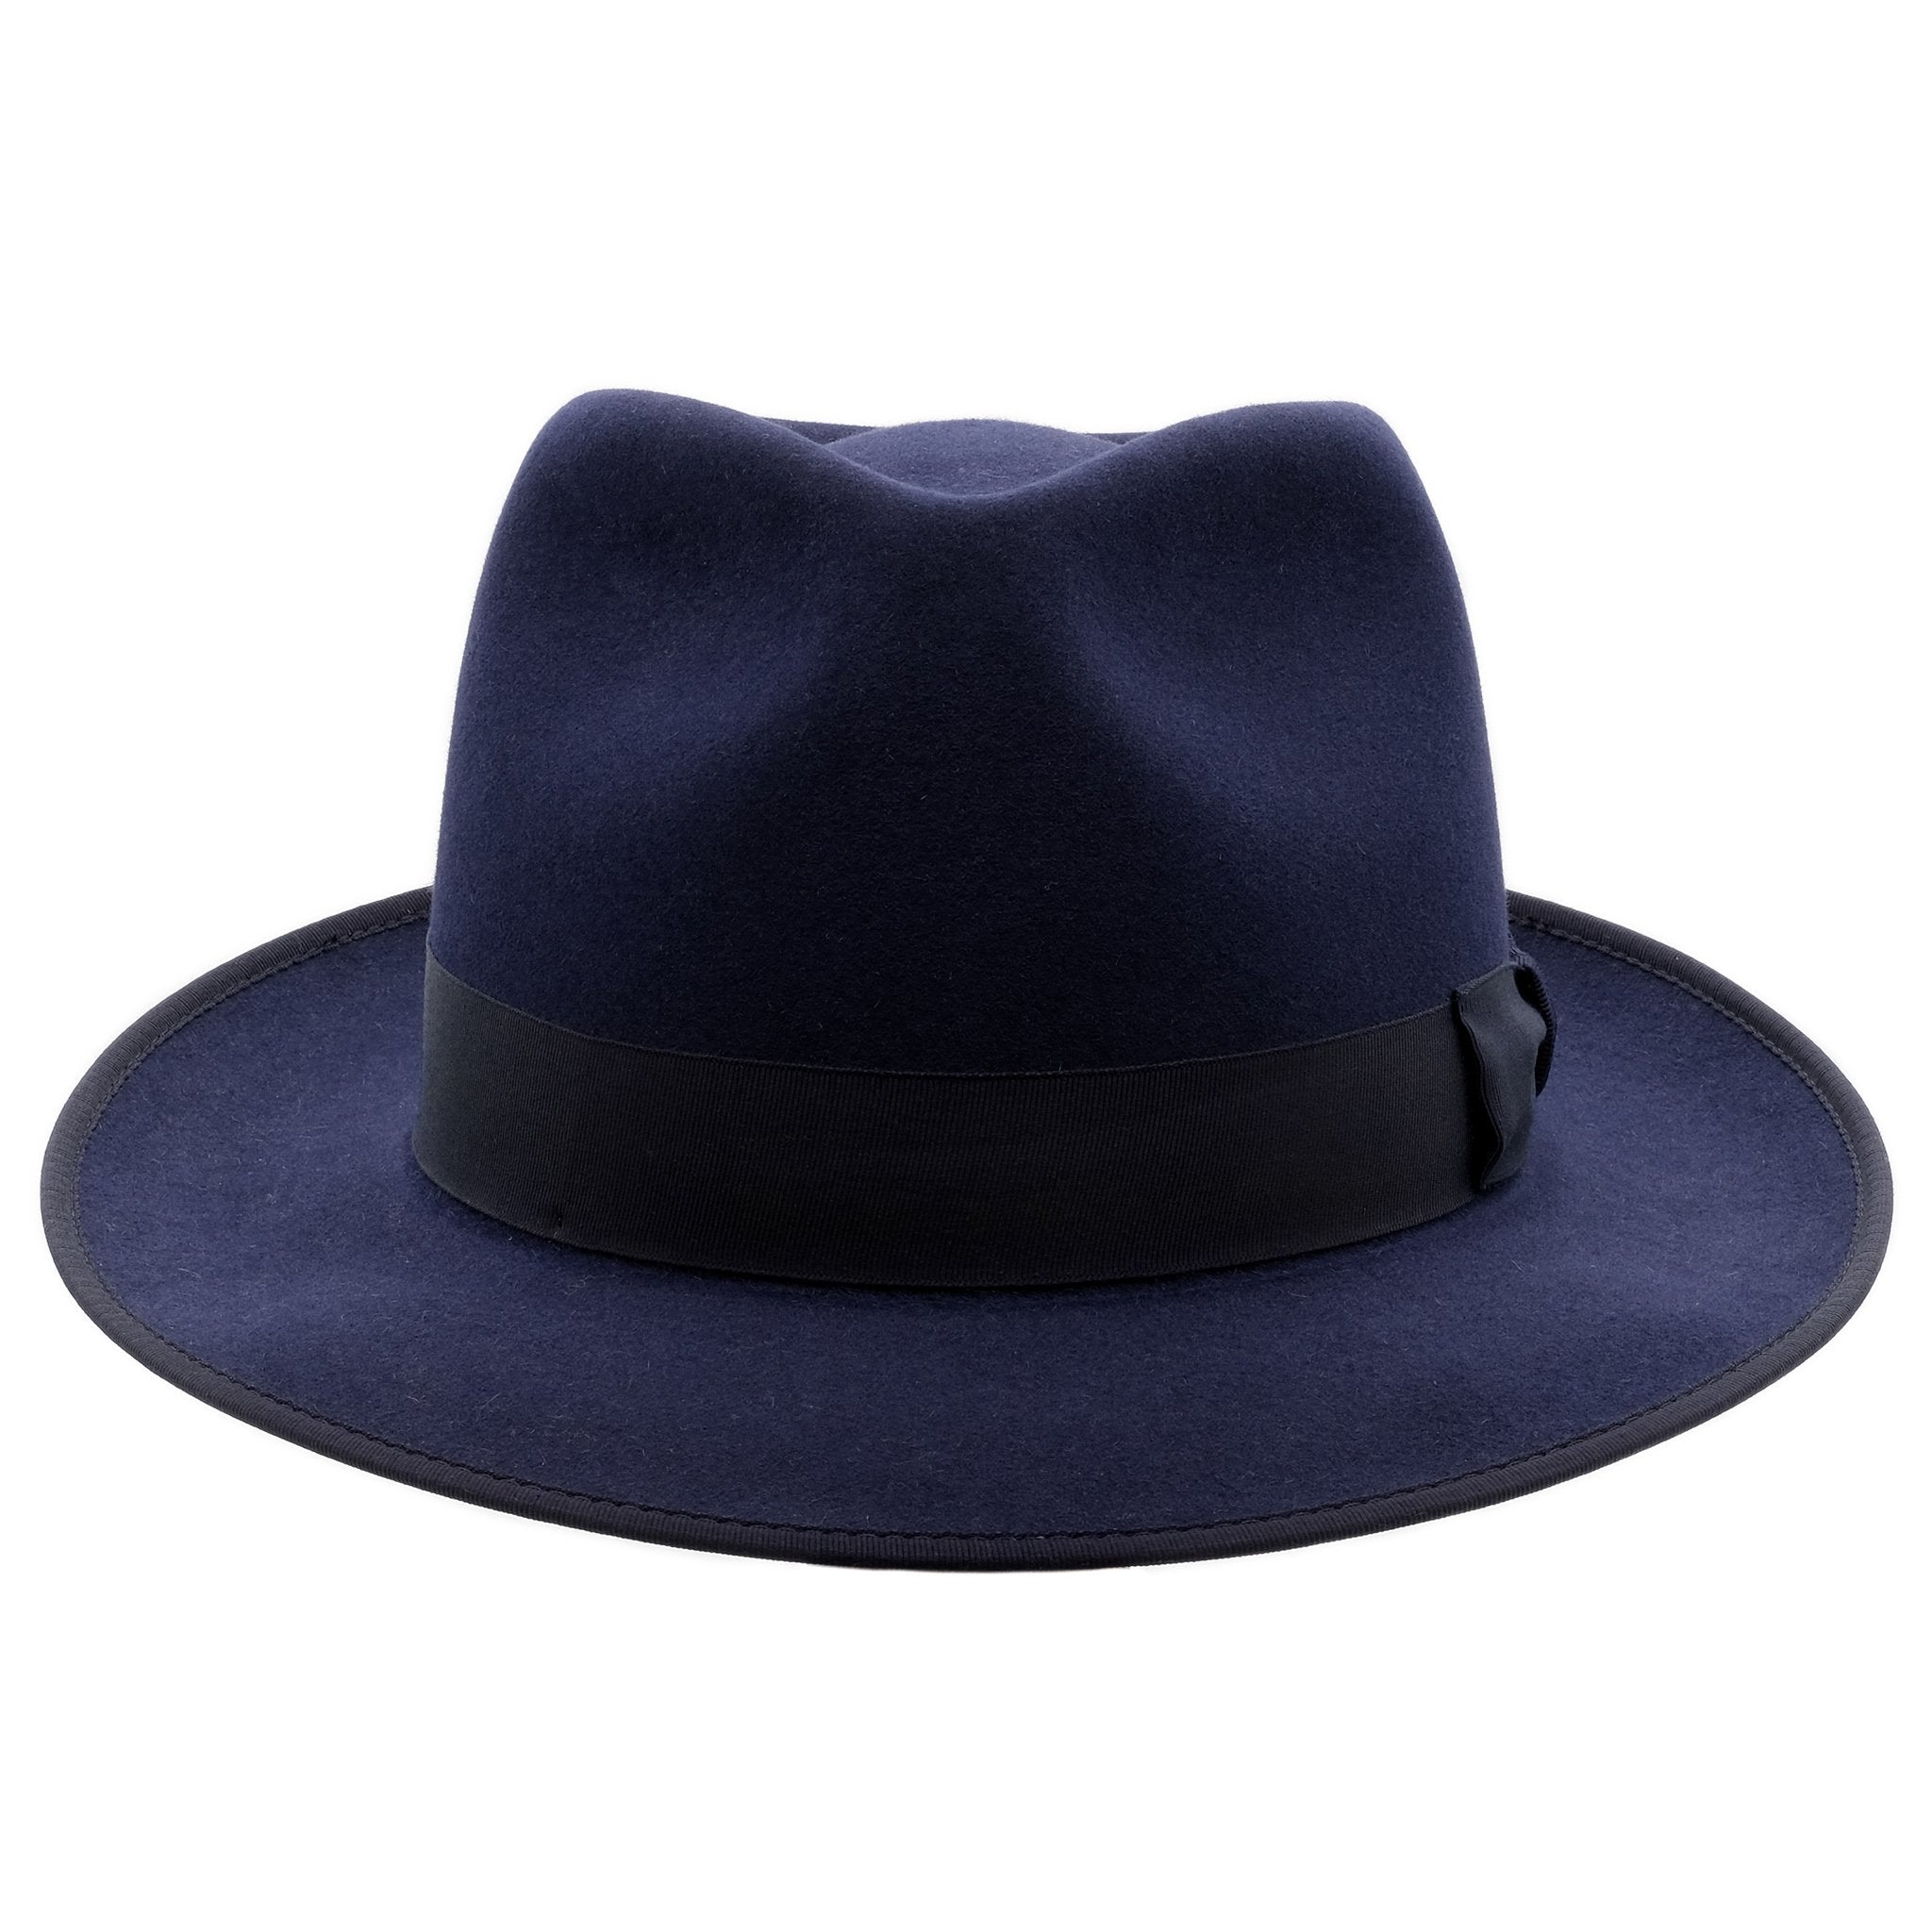 Front view of akubra Stylemaster hat in Federation Navy colour